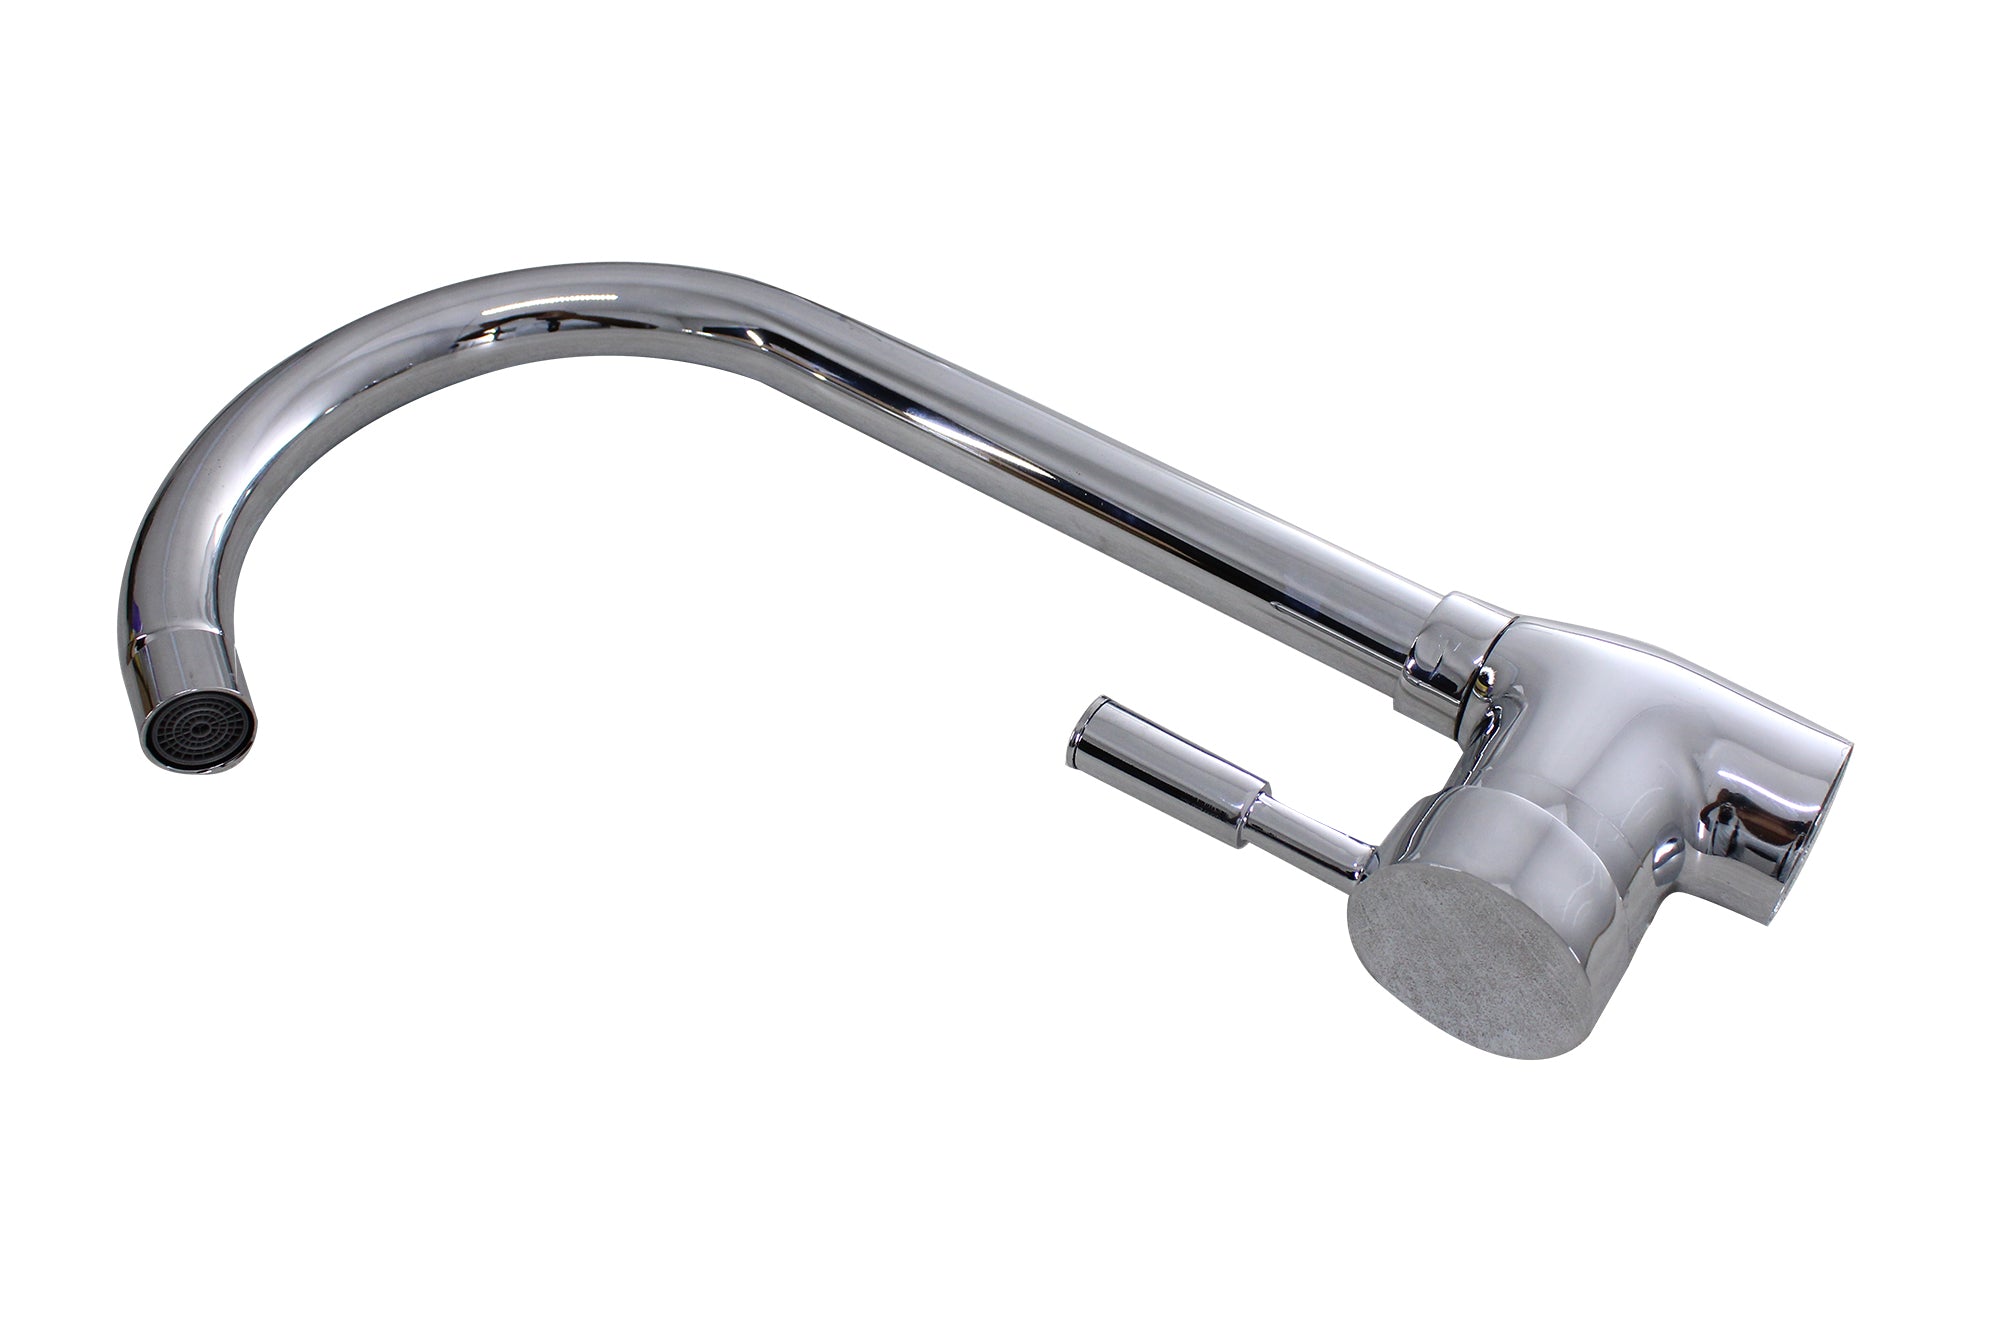 LMA Single Lever Kitchen Sink Tap Mixer with Swivel Spout